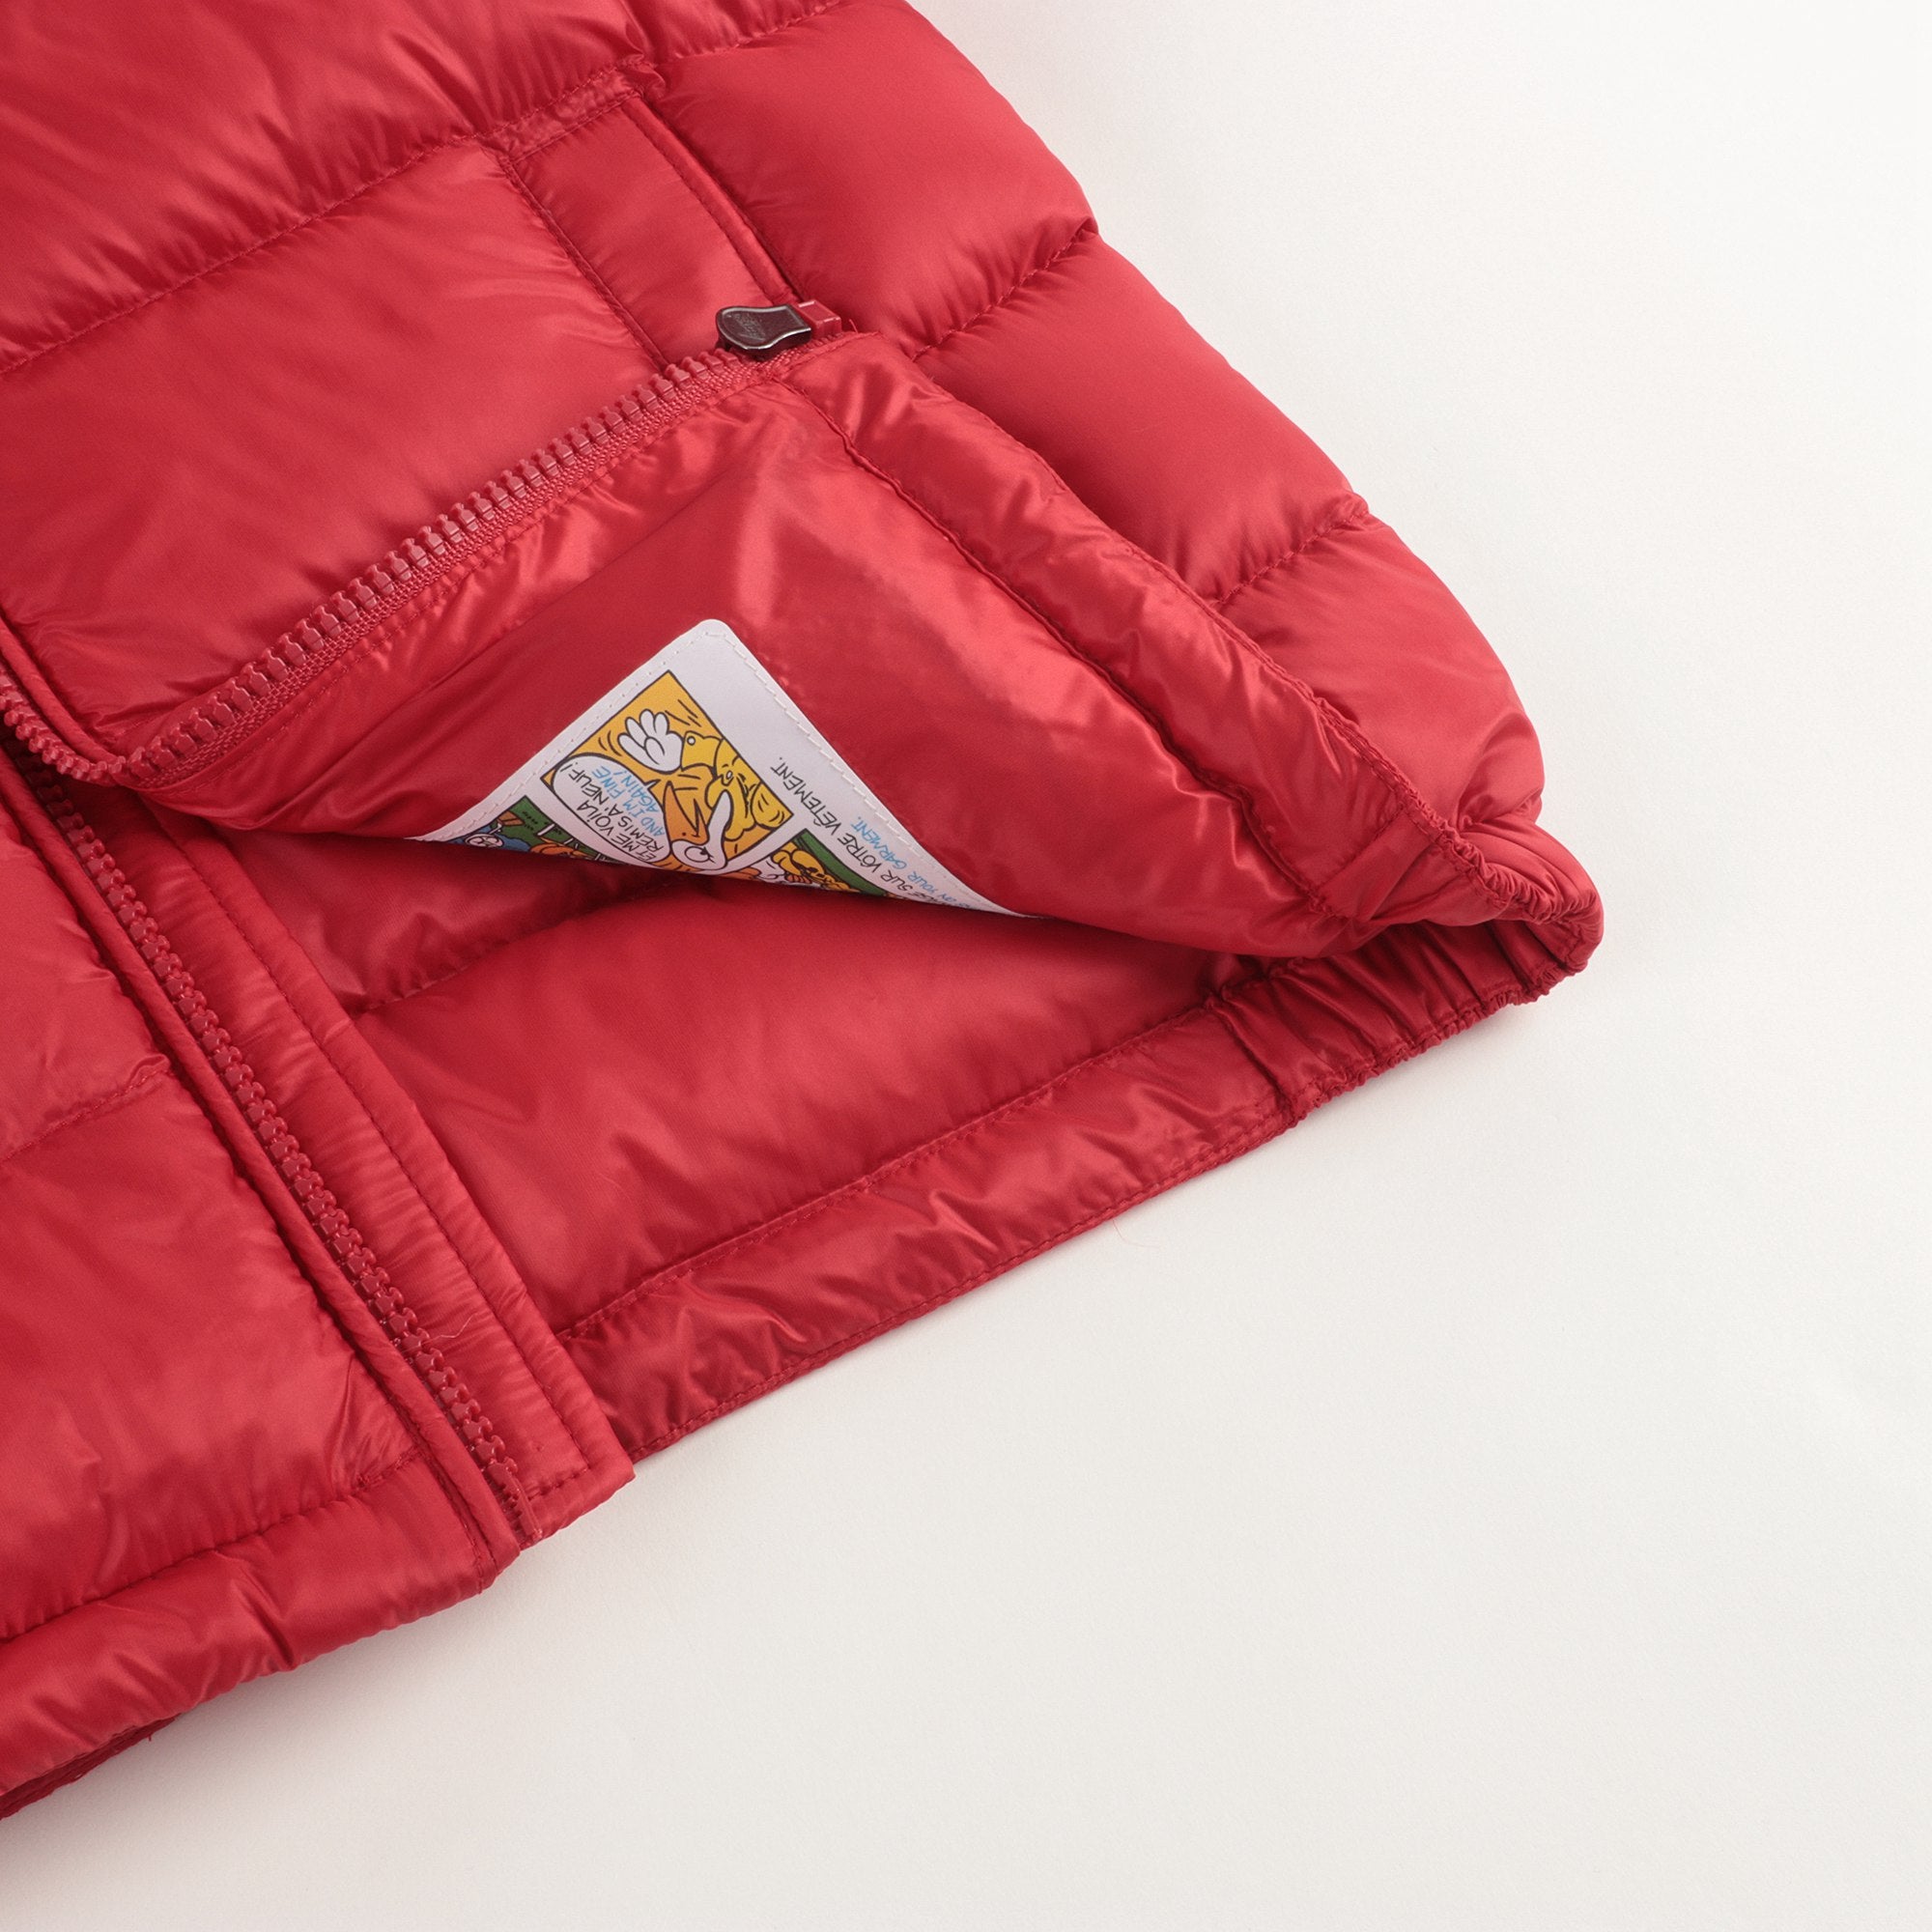 Baby Boys Red "BASS" Padded Down Coat